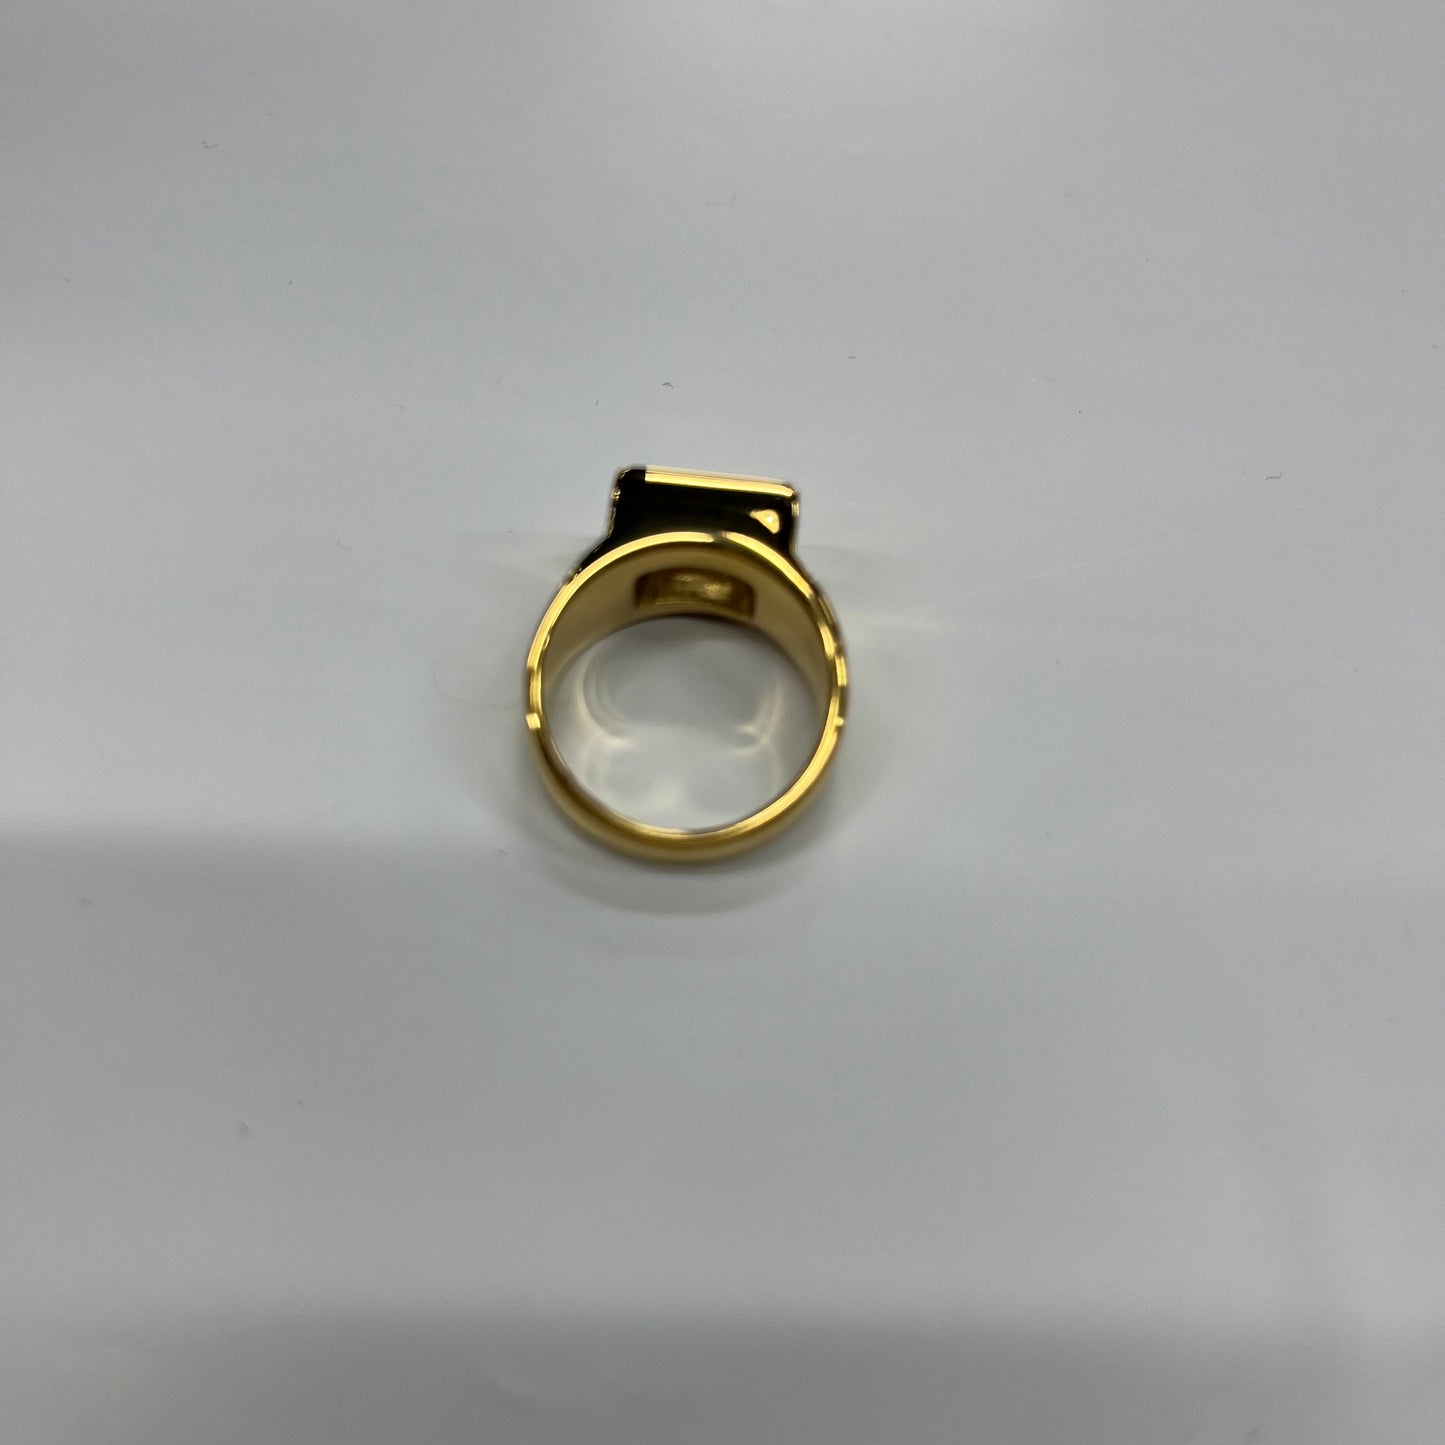 Ring Other By Cmb 18K Plated Over Stainless Steel Size: 6